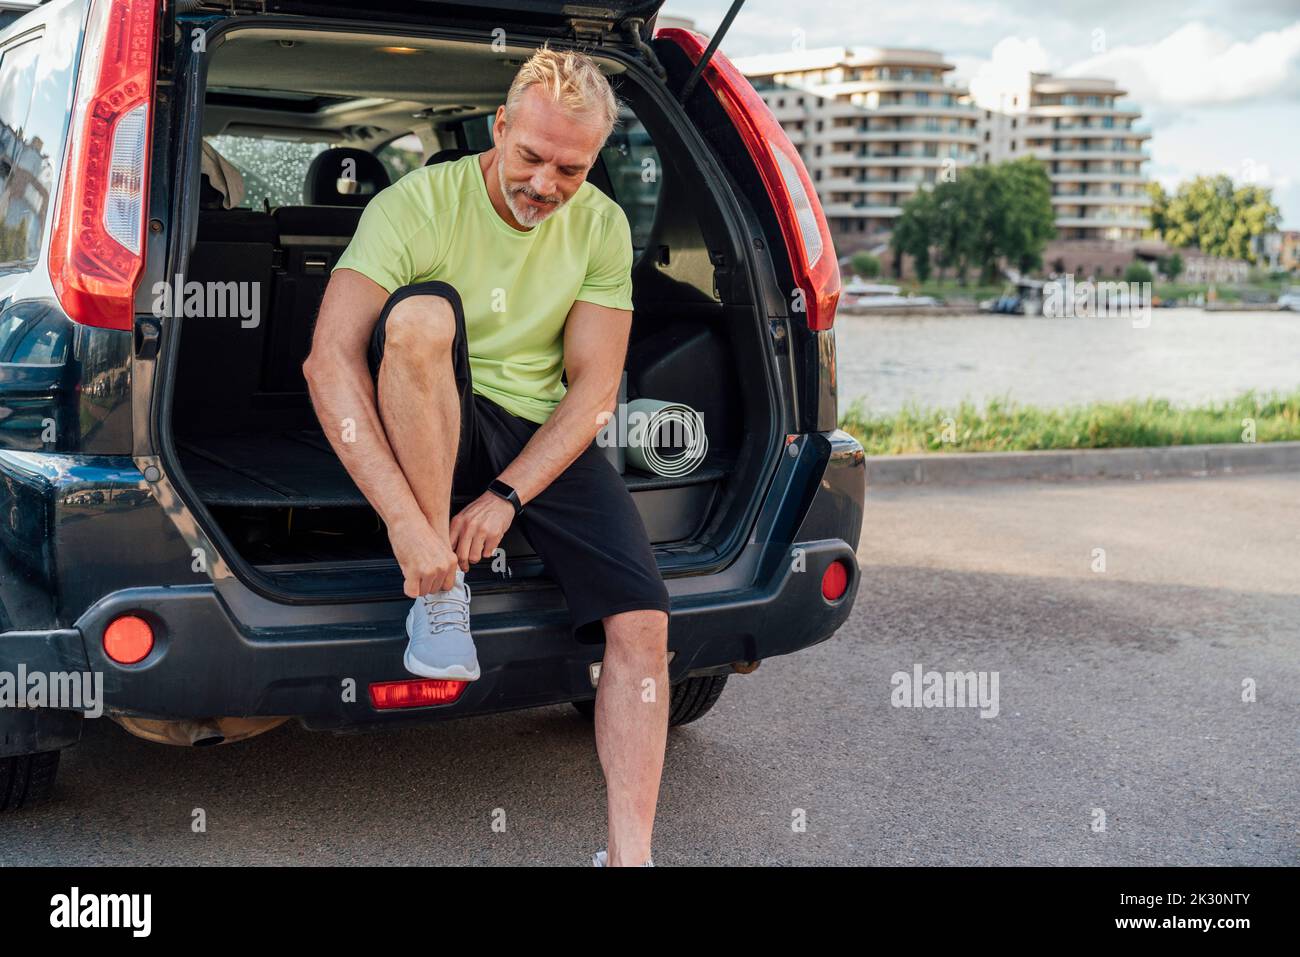 Man tying shoelace sitting in trunk of car Stock Photo